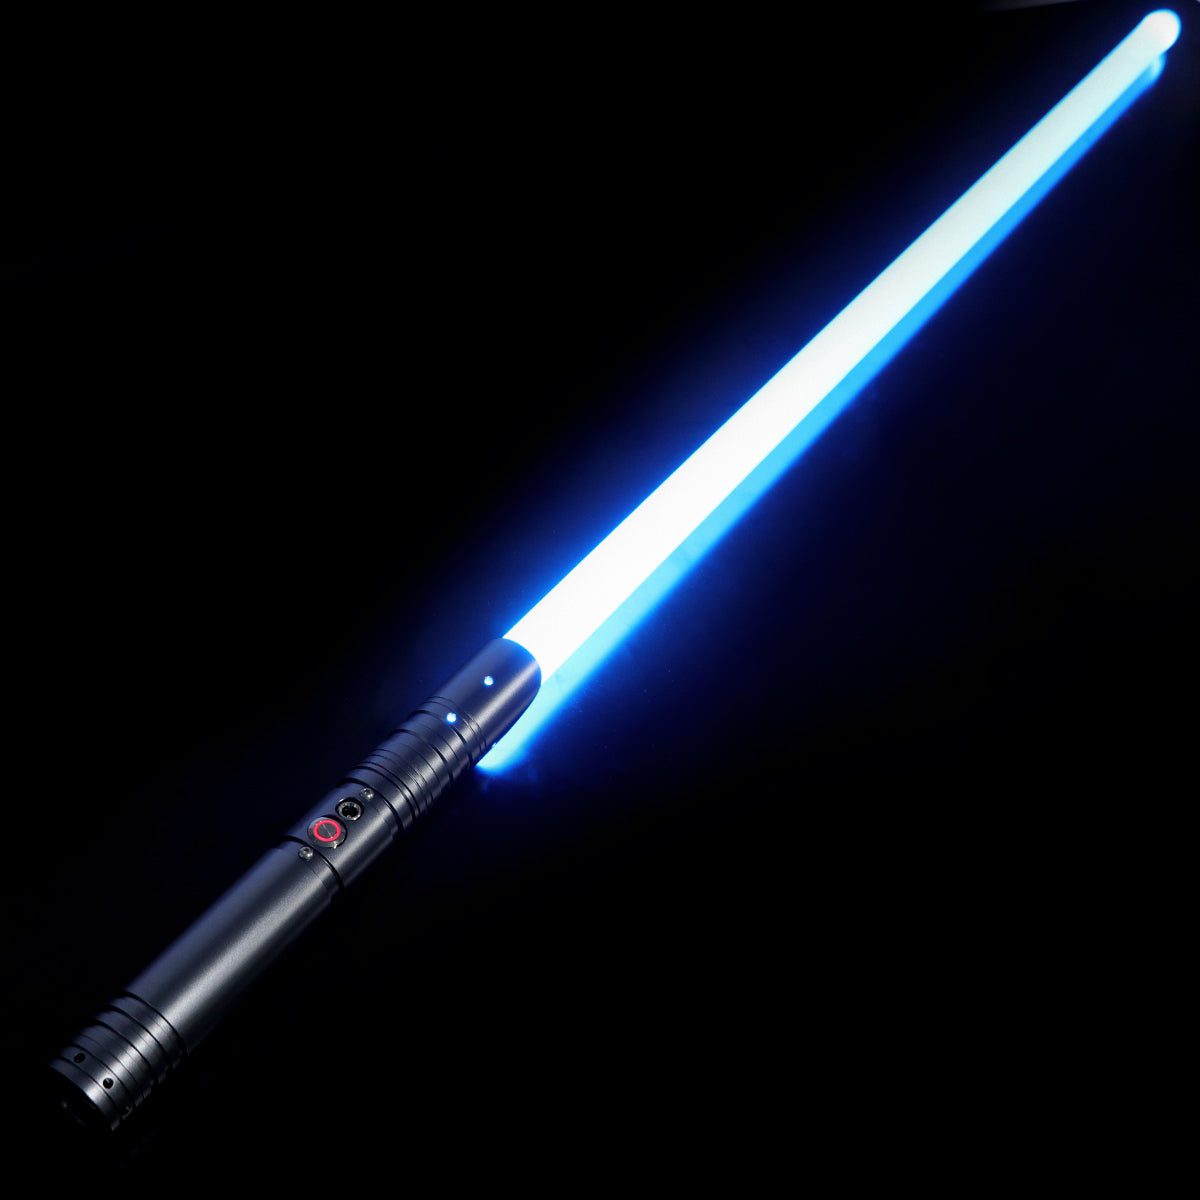 Force FX Lightsabers